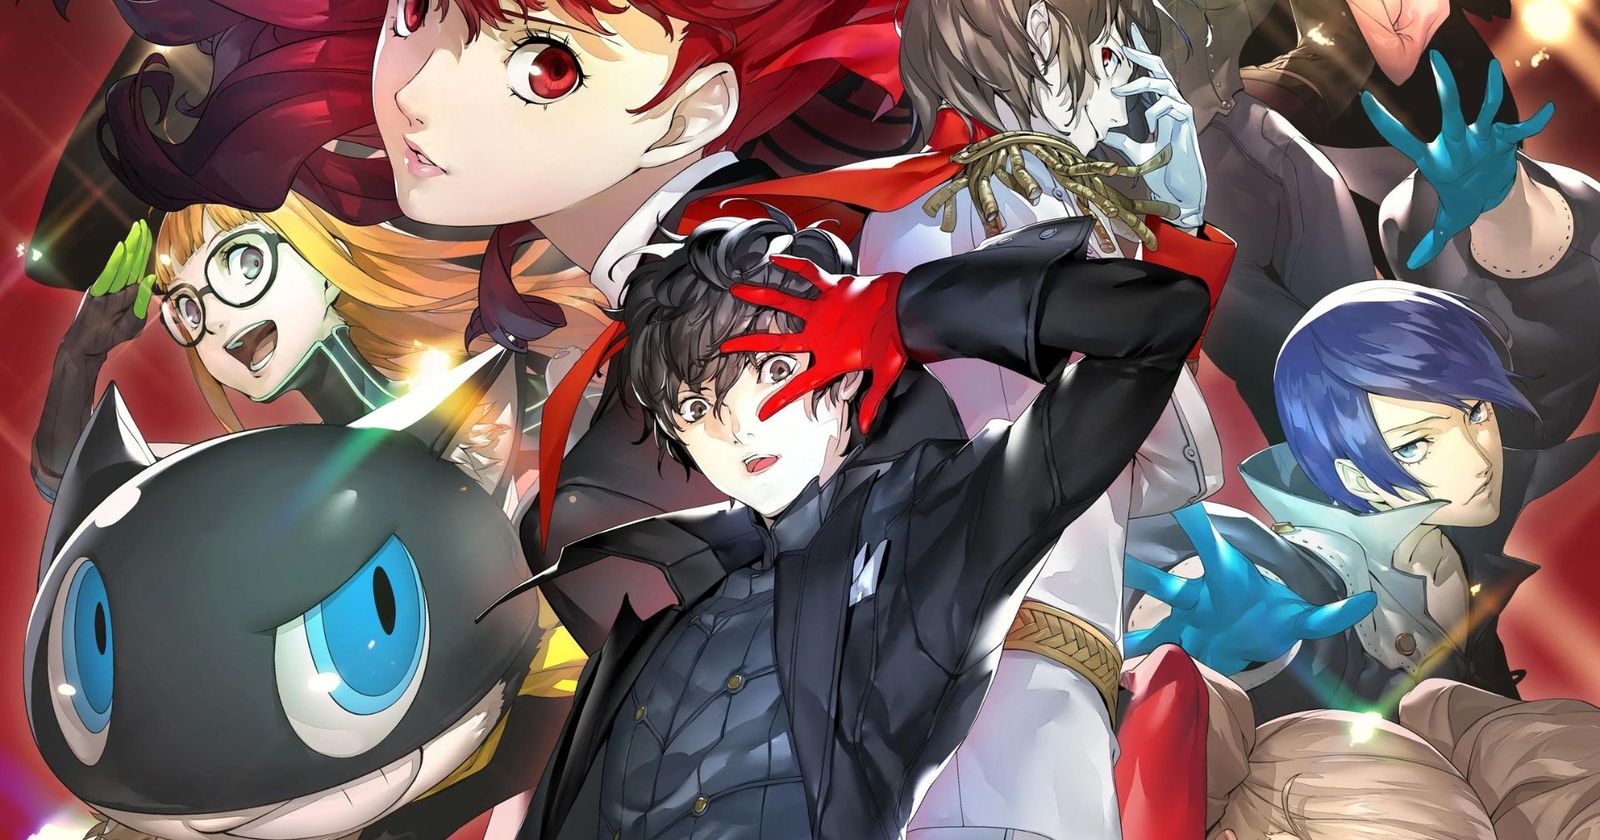 Persona 5 Royal: Confidants Guide - Where to Find All Confidants and How to  Rank Up Fast